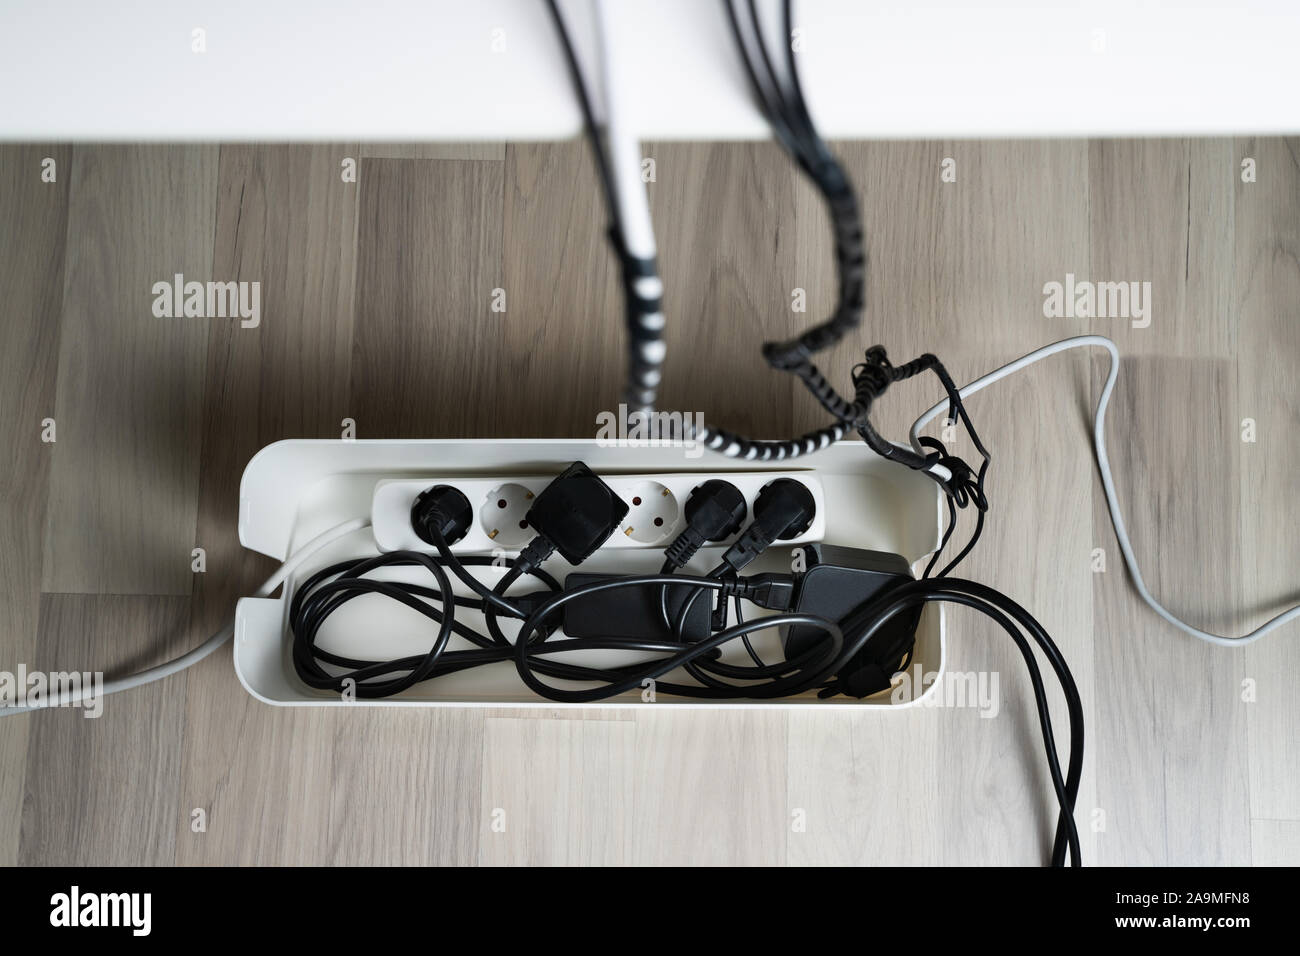 High Angle View Of Cable Management Box With Cables On Hardwood Floor Stock Photo